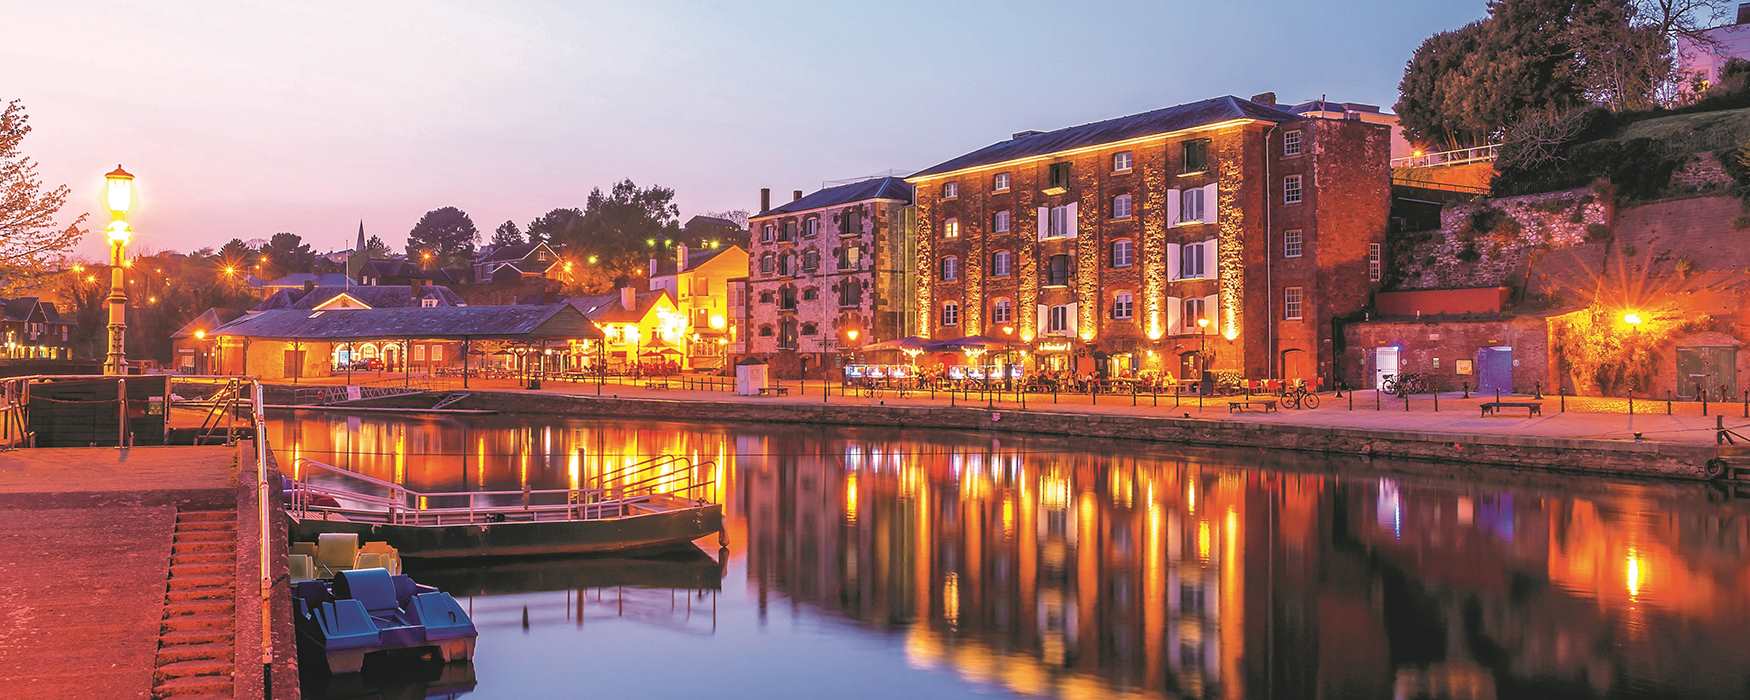 Exeter Quayside, at nighttime